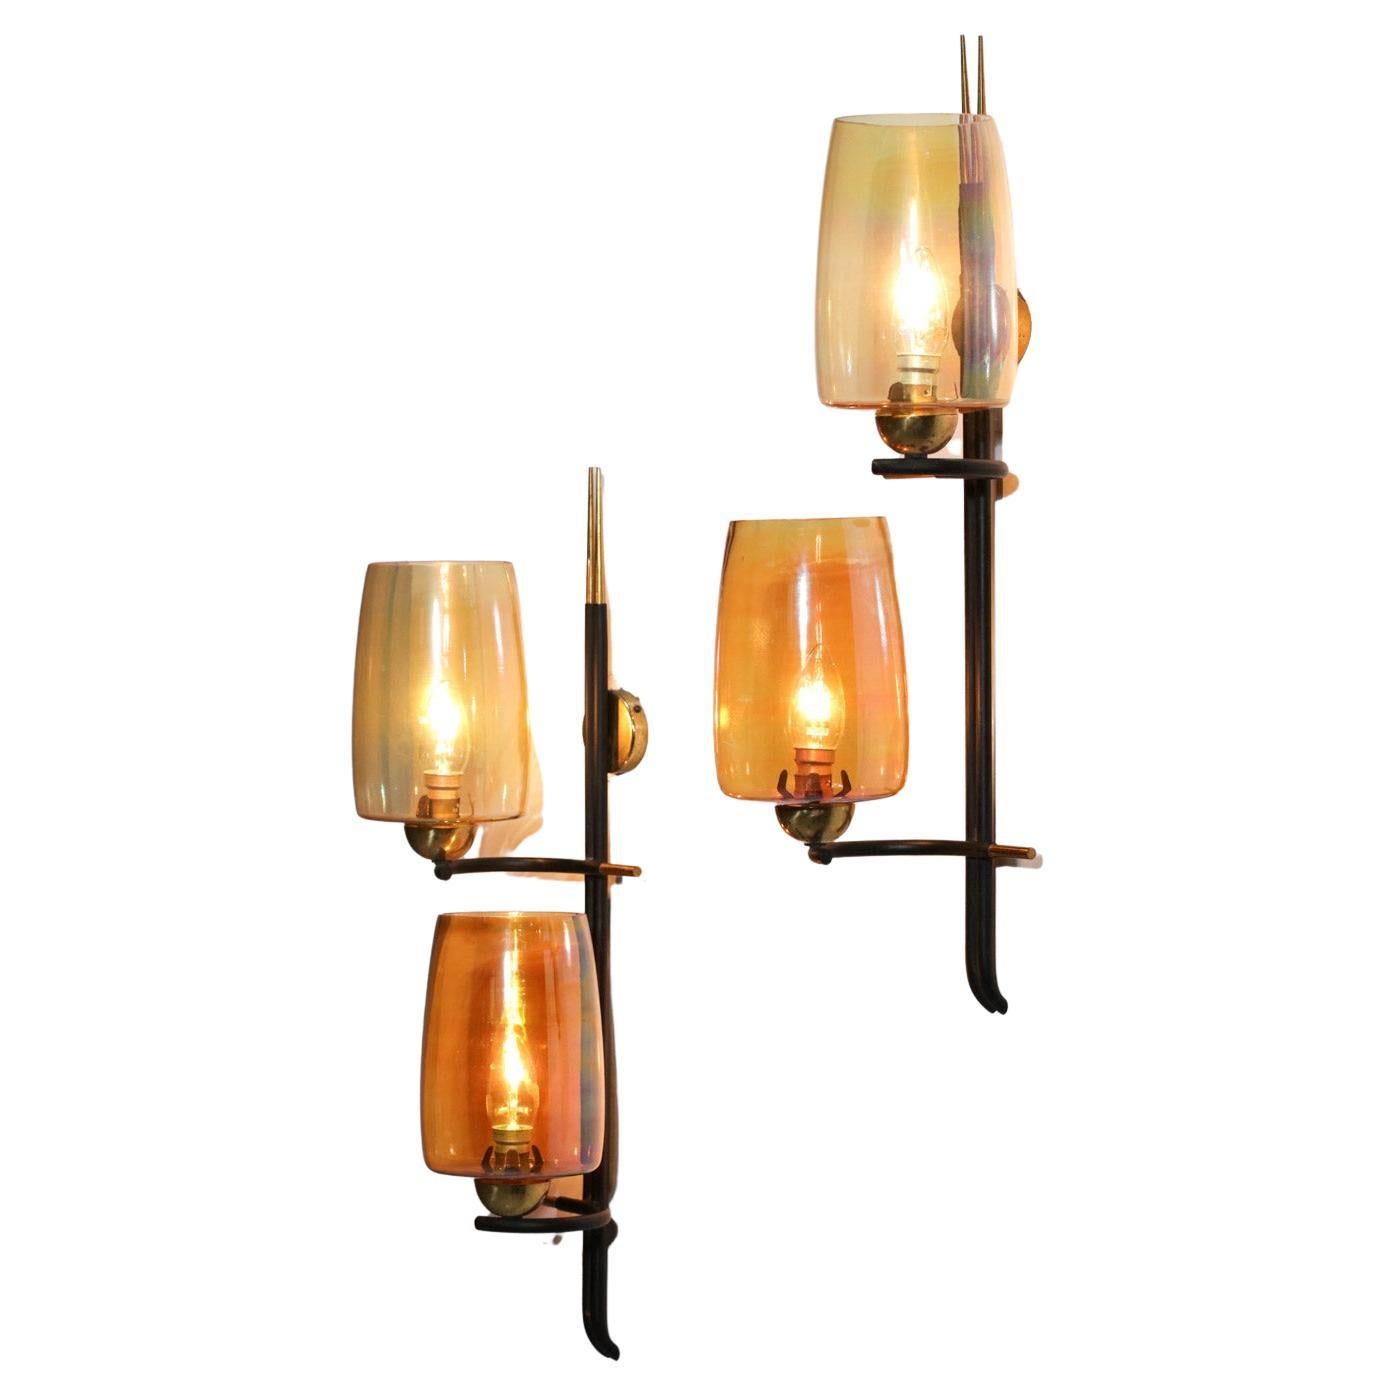 Pair of 50s/60s French Vintage Brass Orange Glass Sconces Wall Lights For Sale